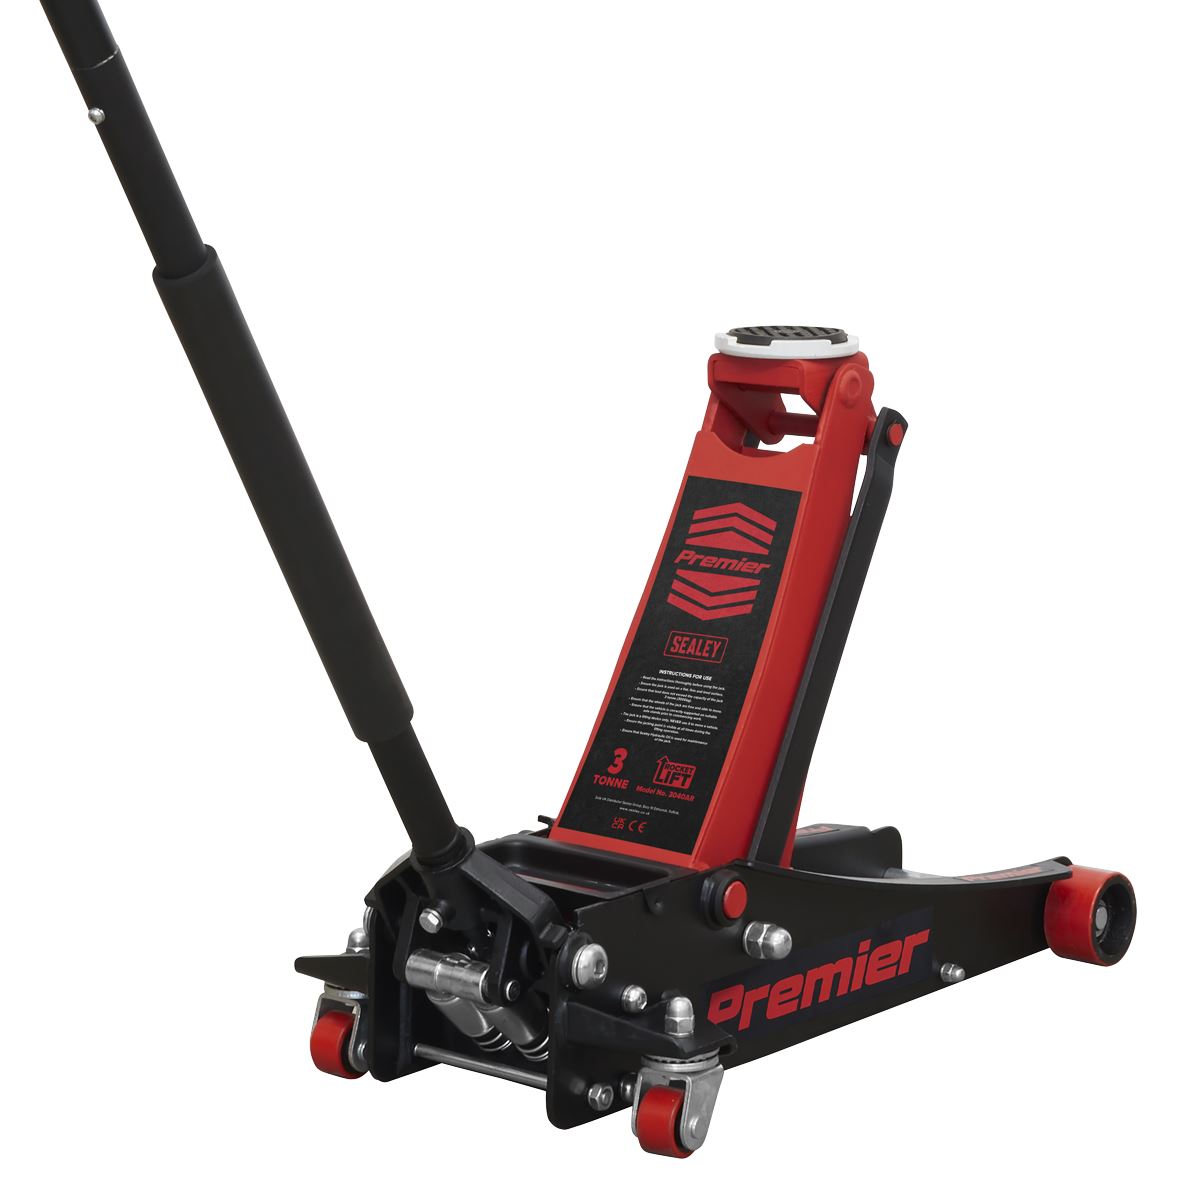 Sealey 3040 Jack Stand Deal